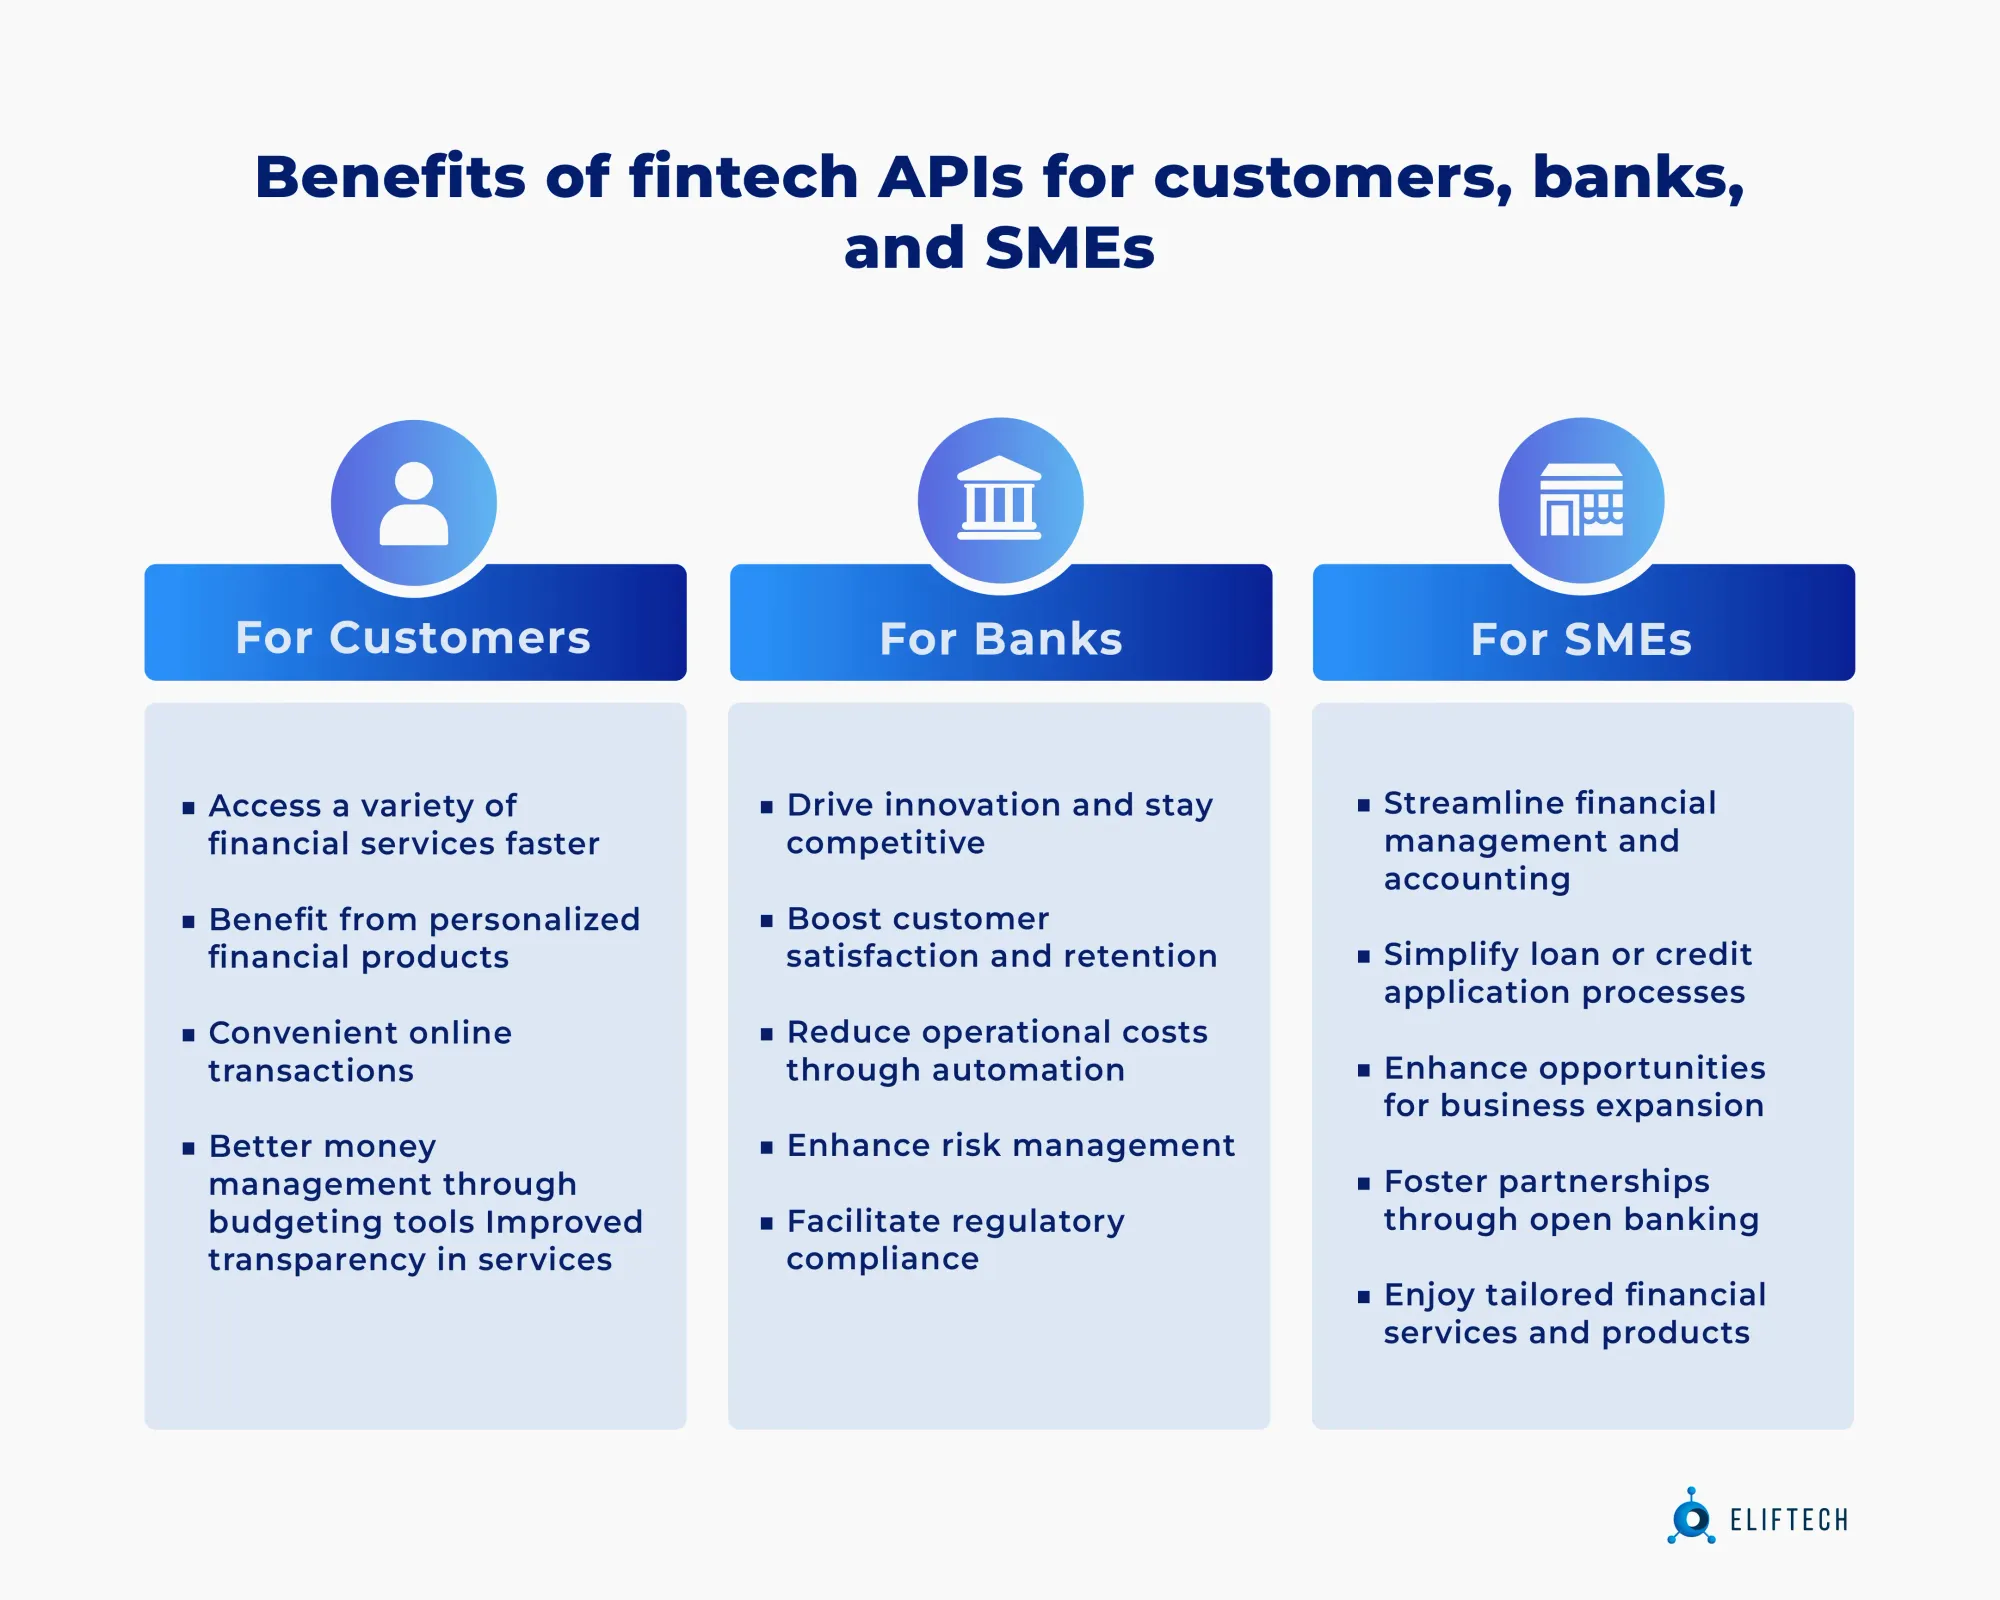 Benefits of fintech APIs for customers, banks, and SMEs